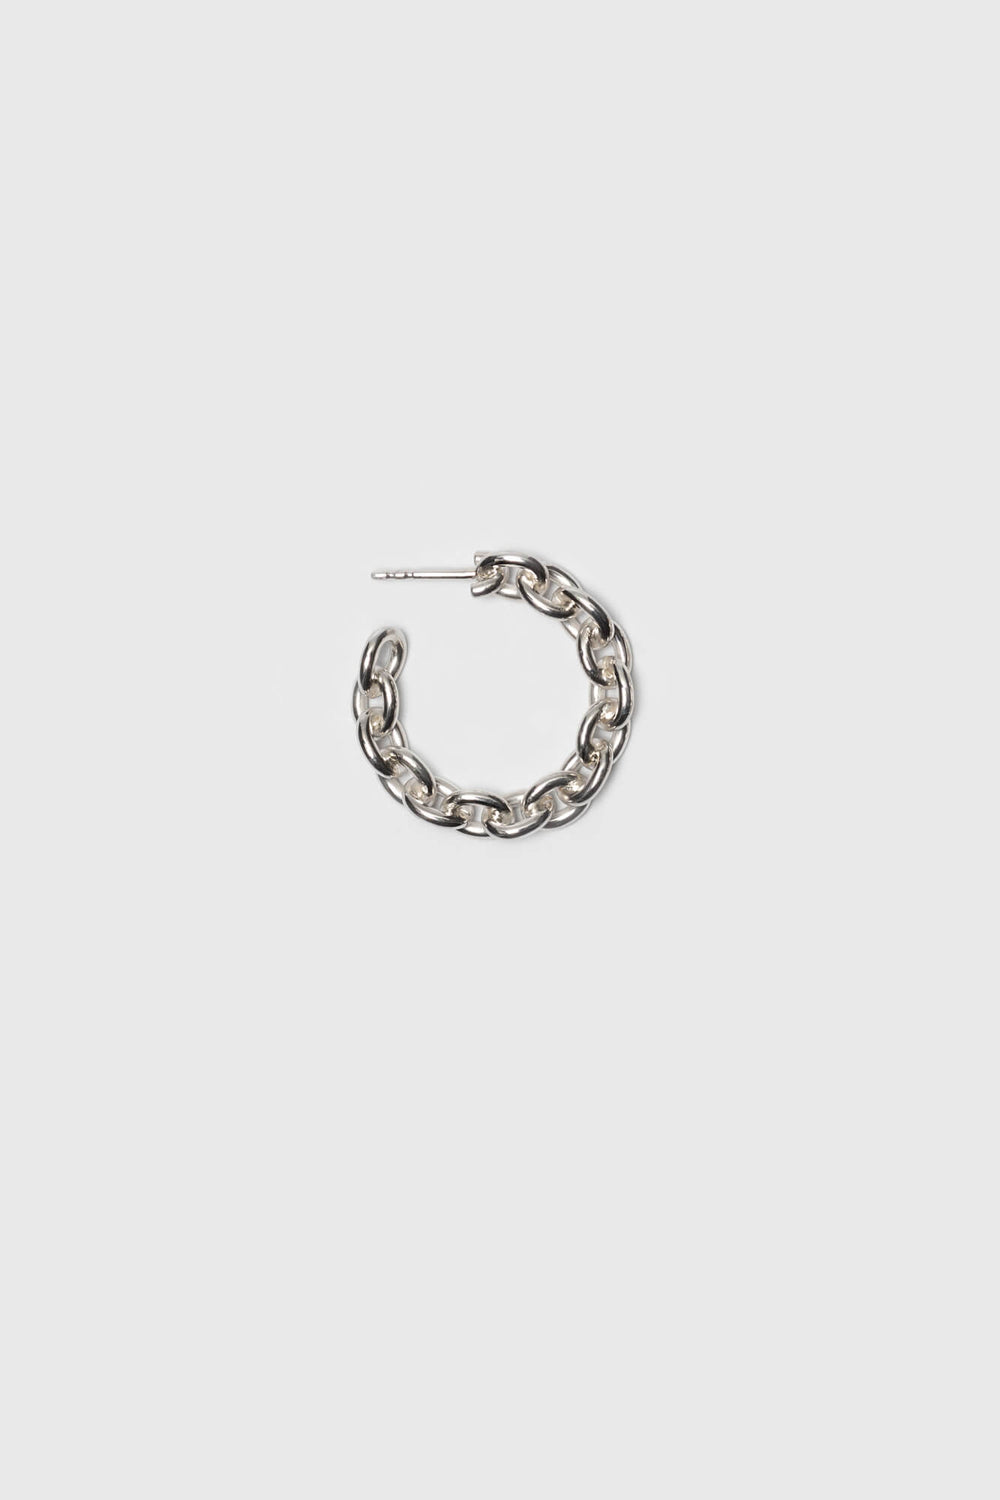 Link chain earring with a high gloss finish. Single piece. Fine jewelry handmade in Berlin.